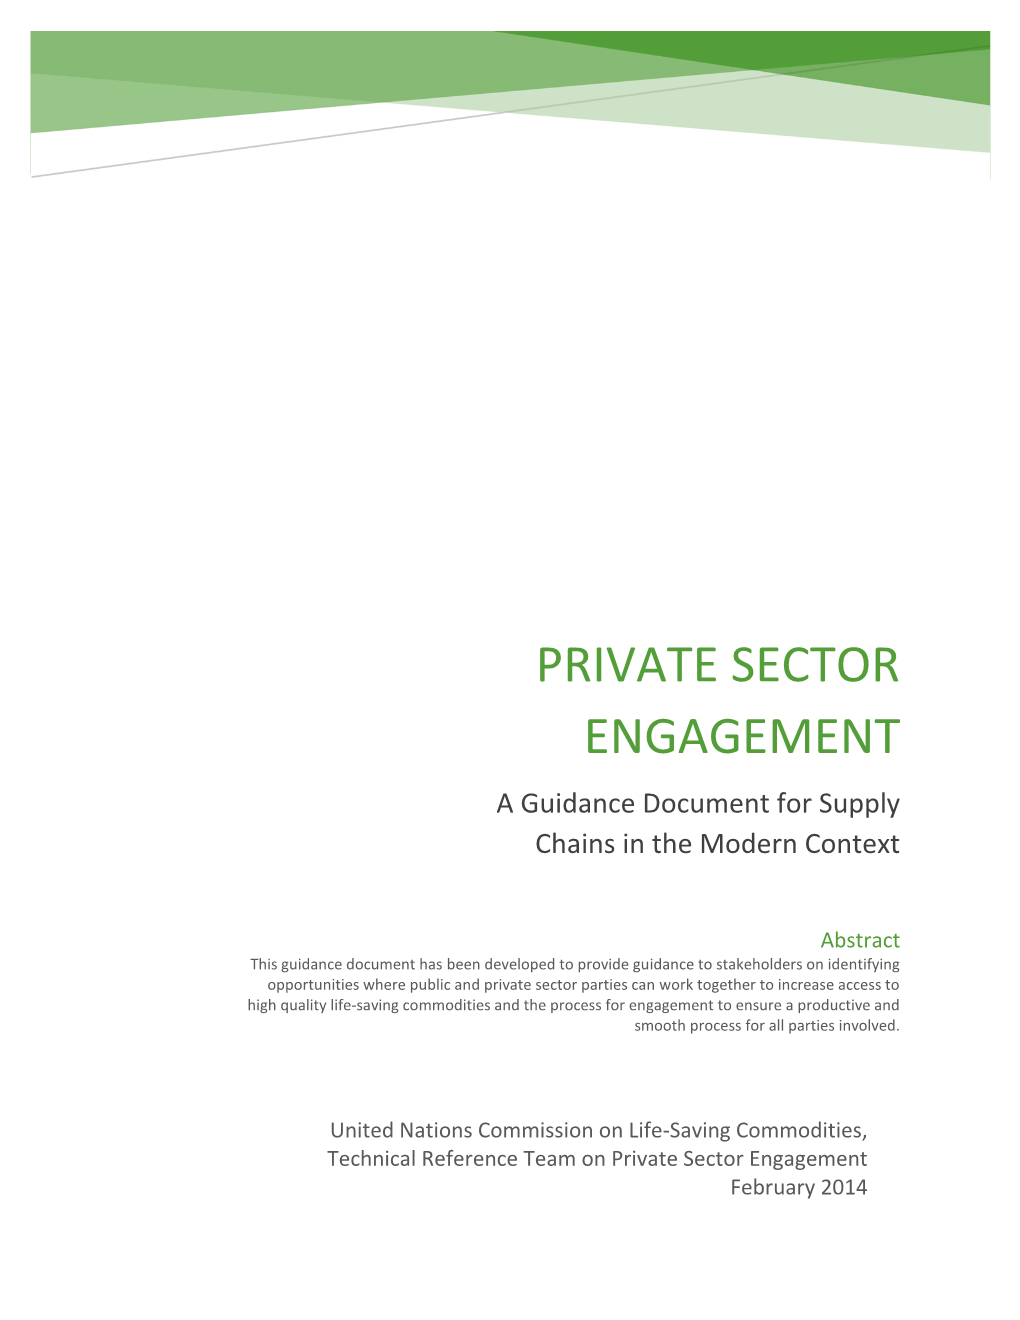 Private Sector Engagement: a Guidance Document for Supply Chains in the Modern Context